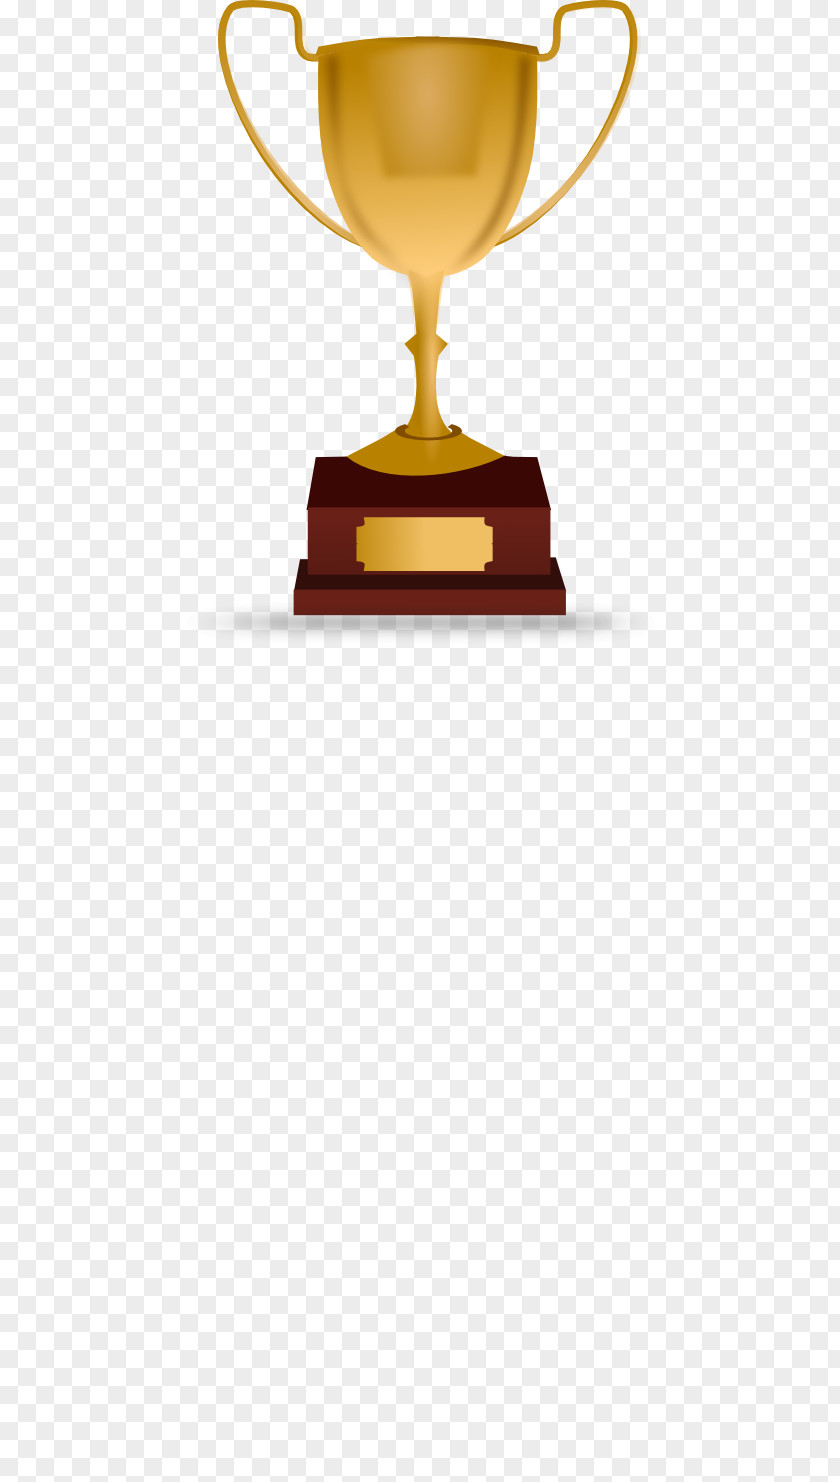 Pictures Of Trophies Trophy Clip Art PNG